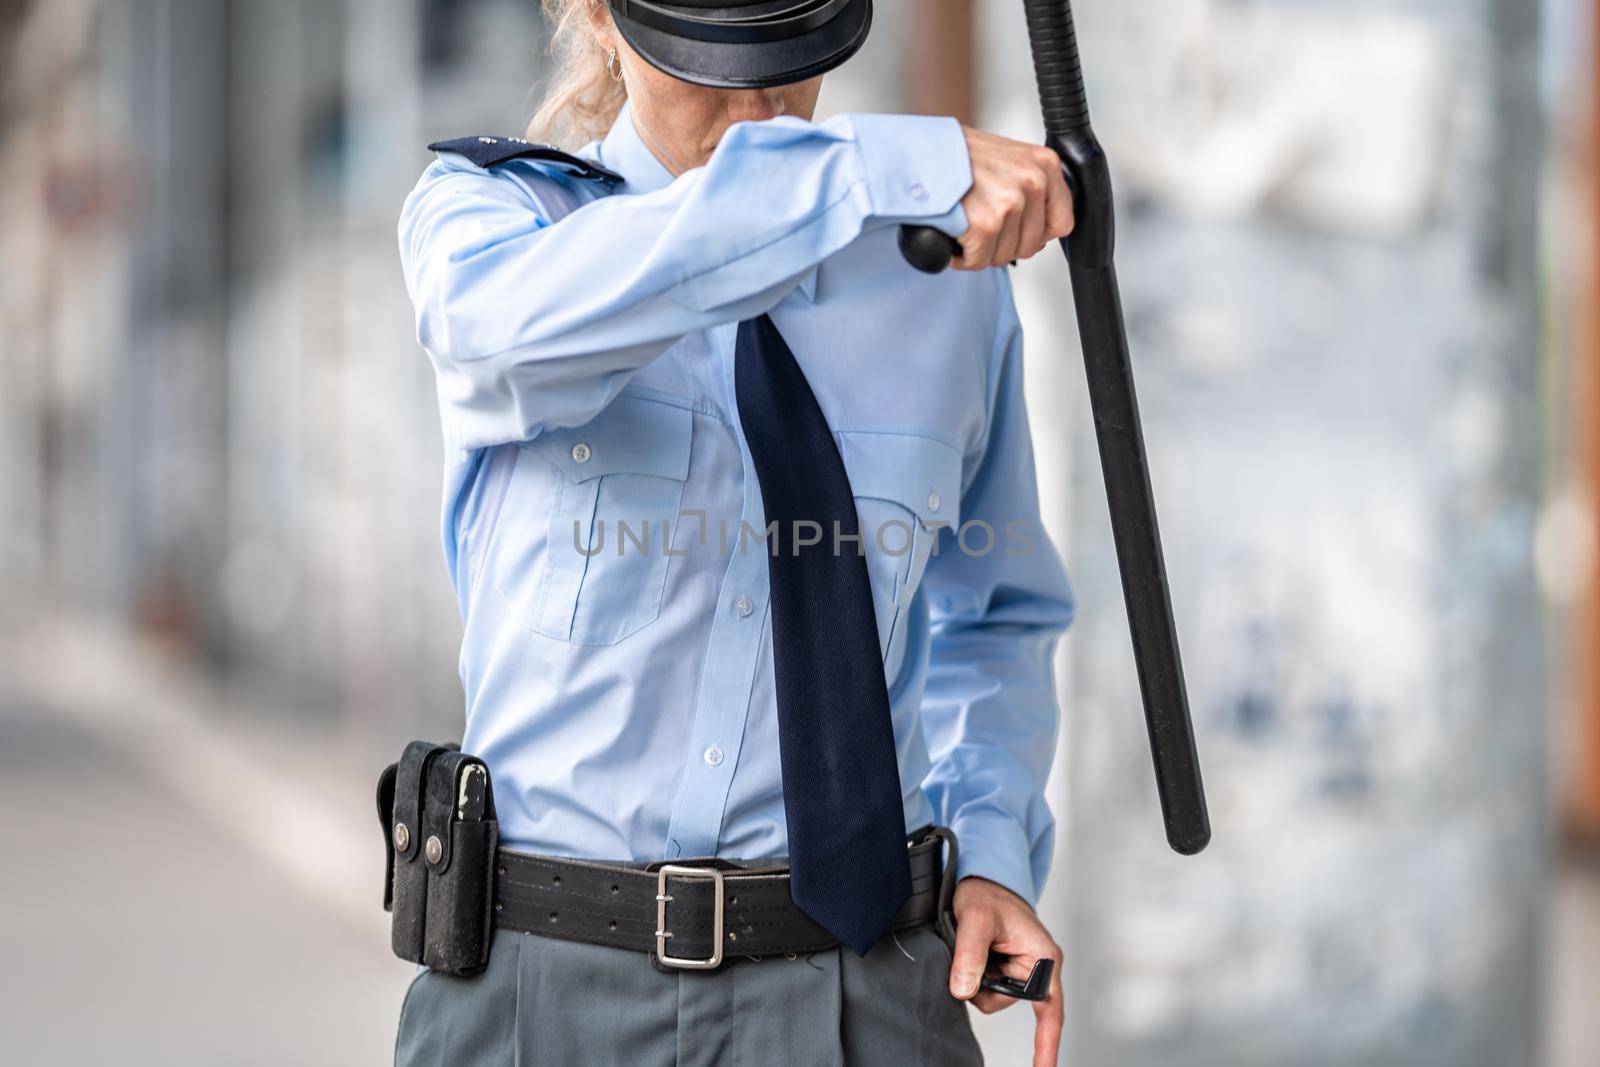 policewoman with a baton in her hand in the street.